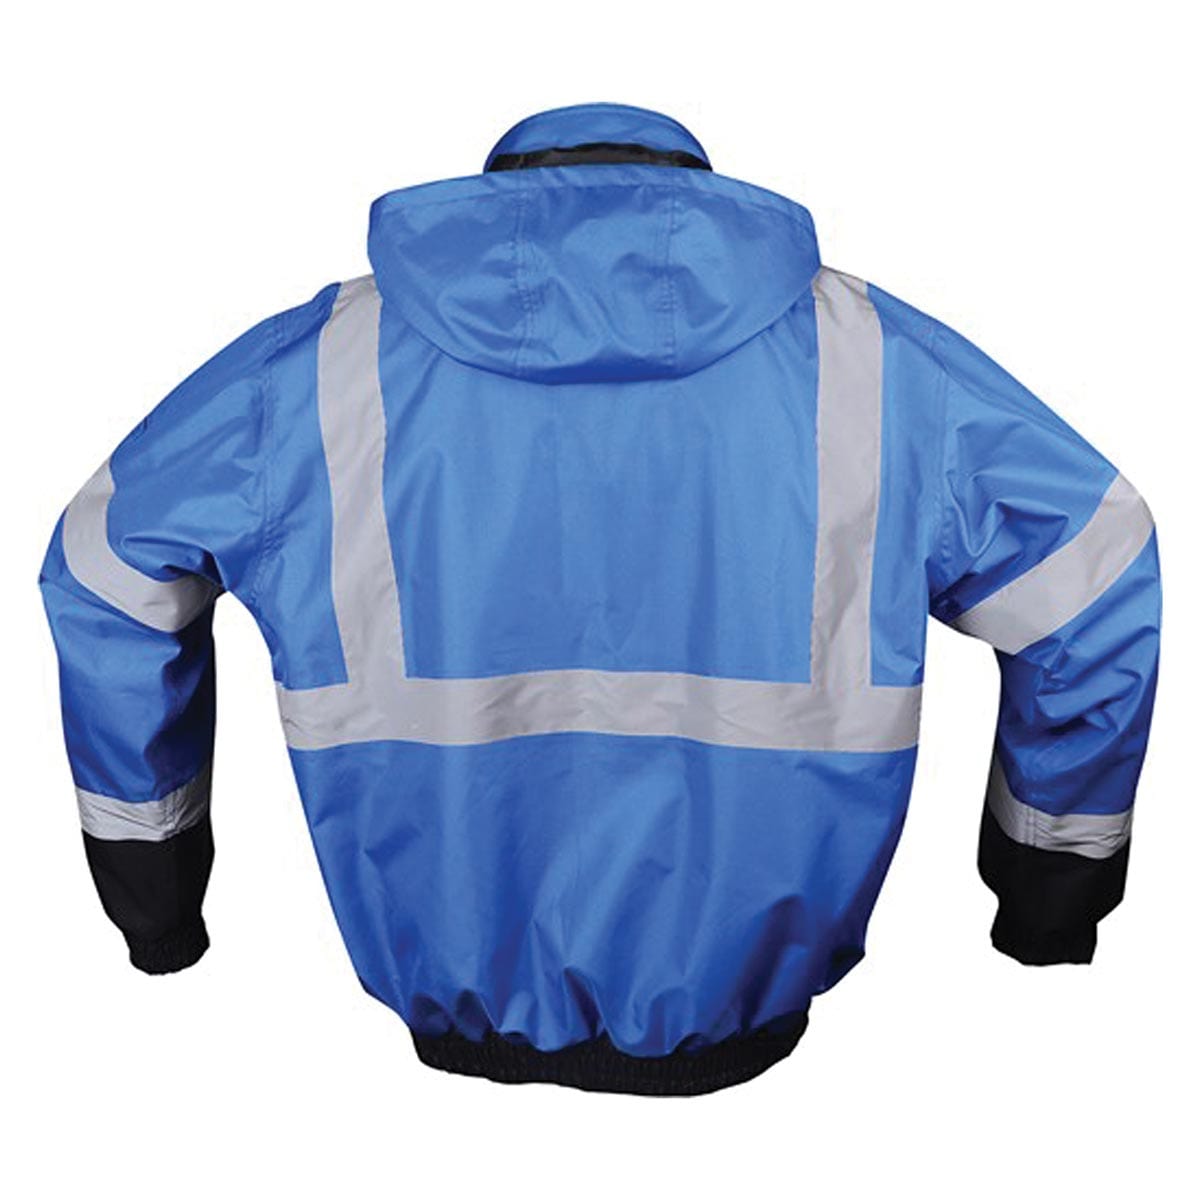 GSS Safety Non-ANSI Multi-Color Waterproof Enhanced Visibility Bomber Jacket w/ Black Bottom